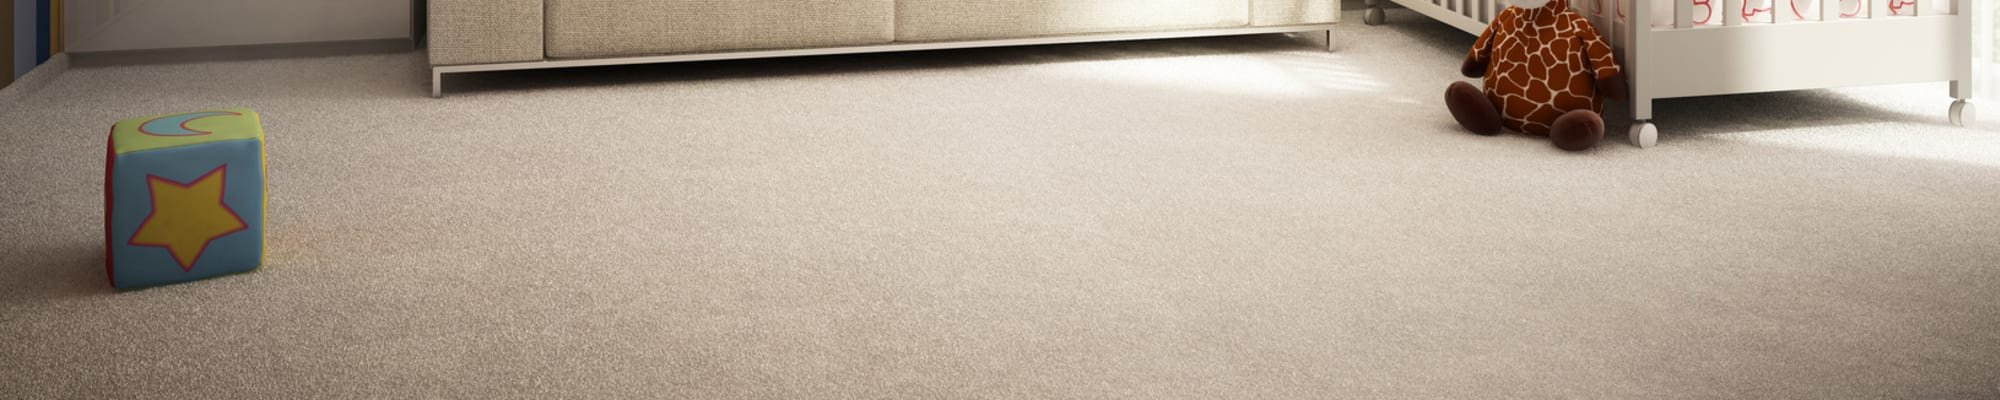 Carpet binding and serging services offered by The Carpet Man in Indianapolis, IN